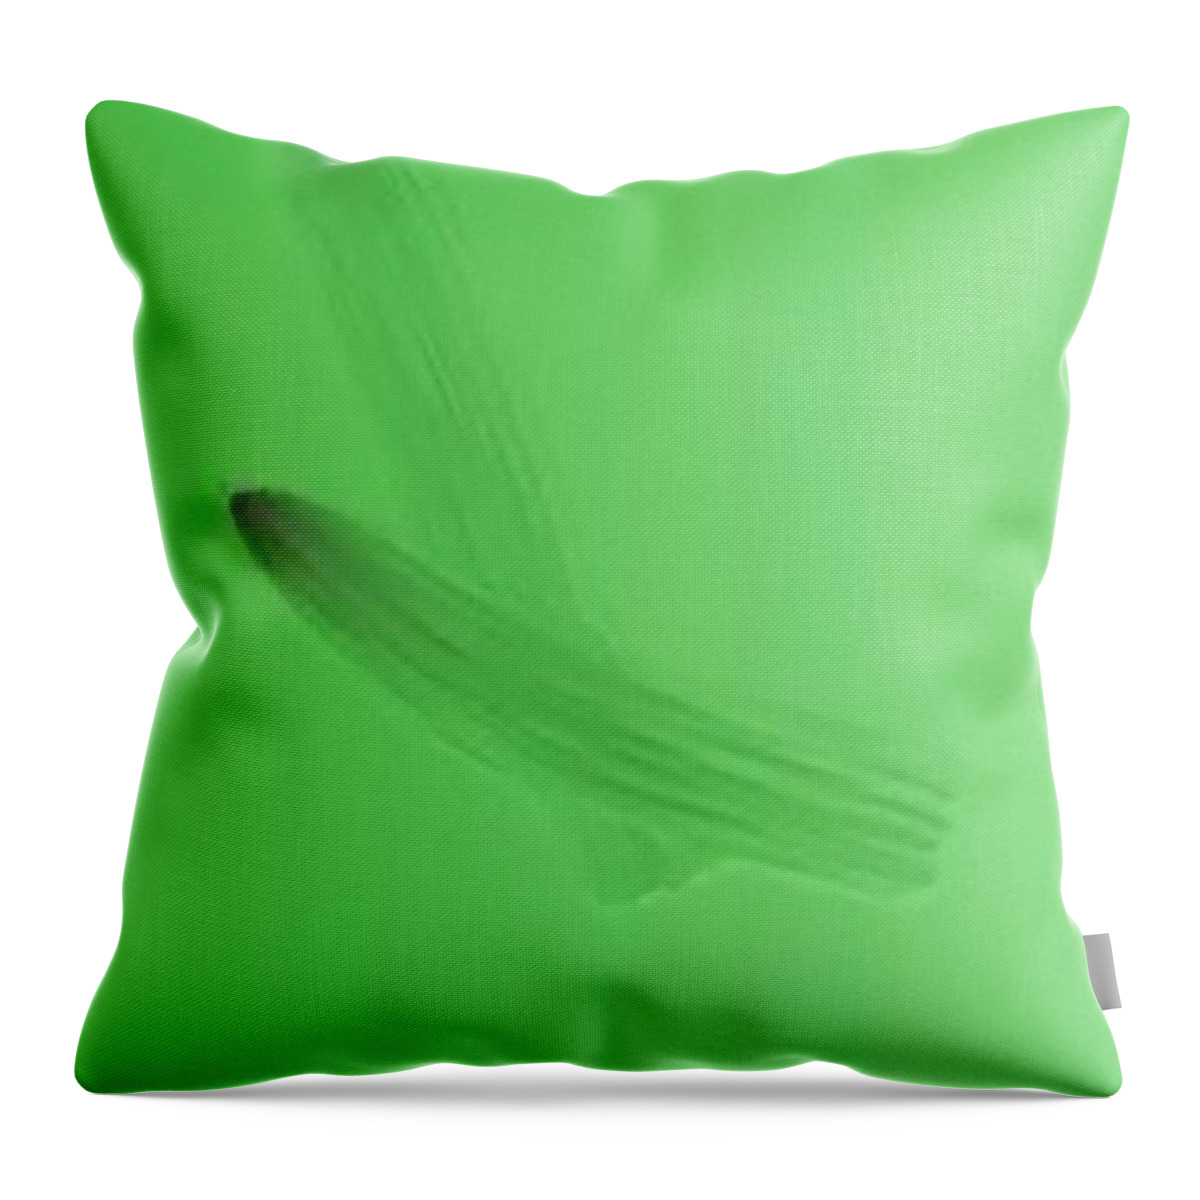 Green Throw Pillow featuring the painting Verdpen by Archangelus Gallery